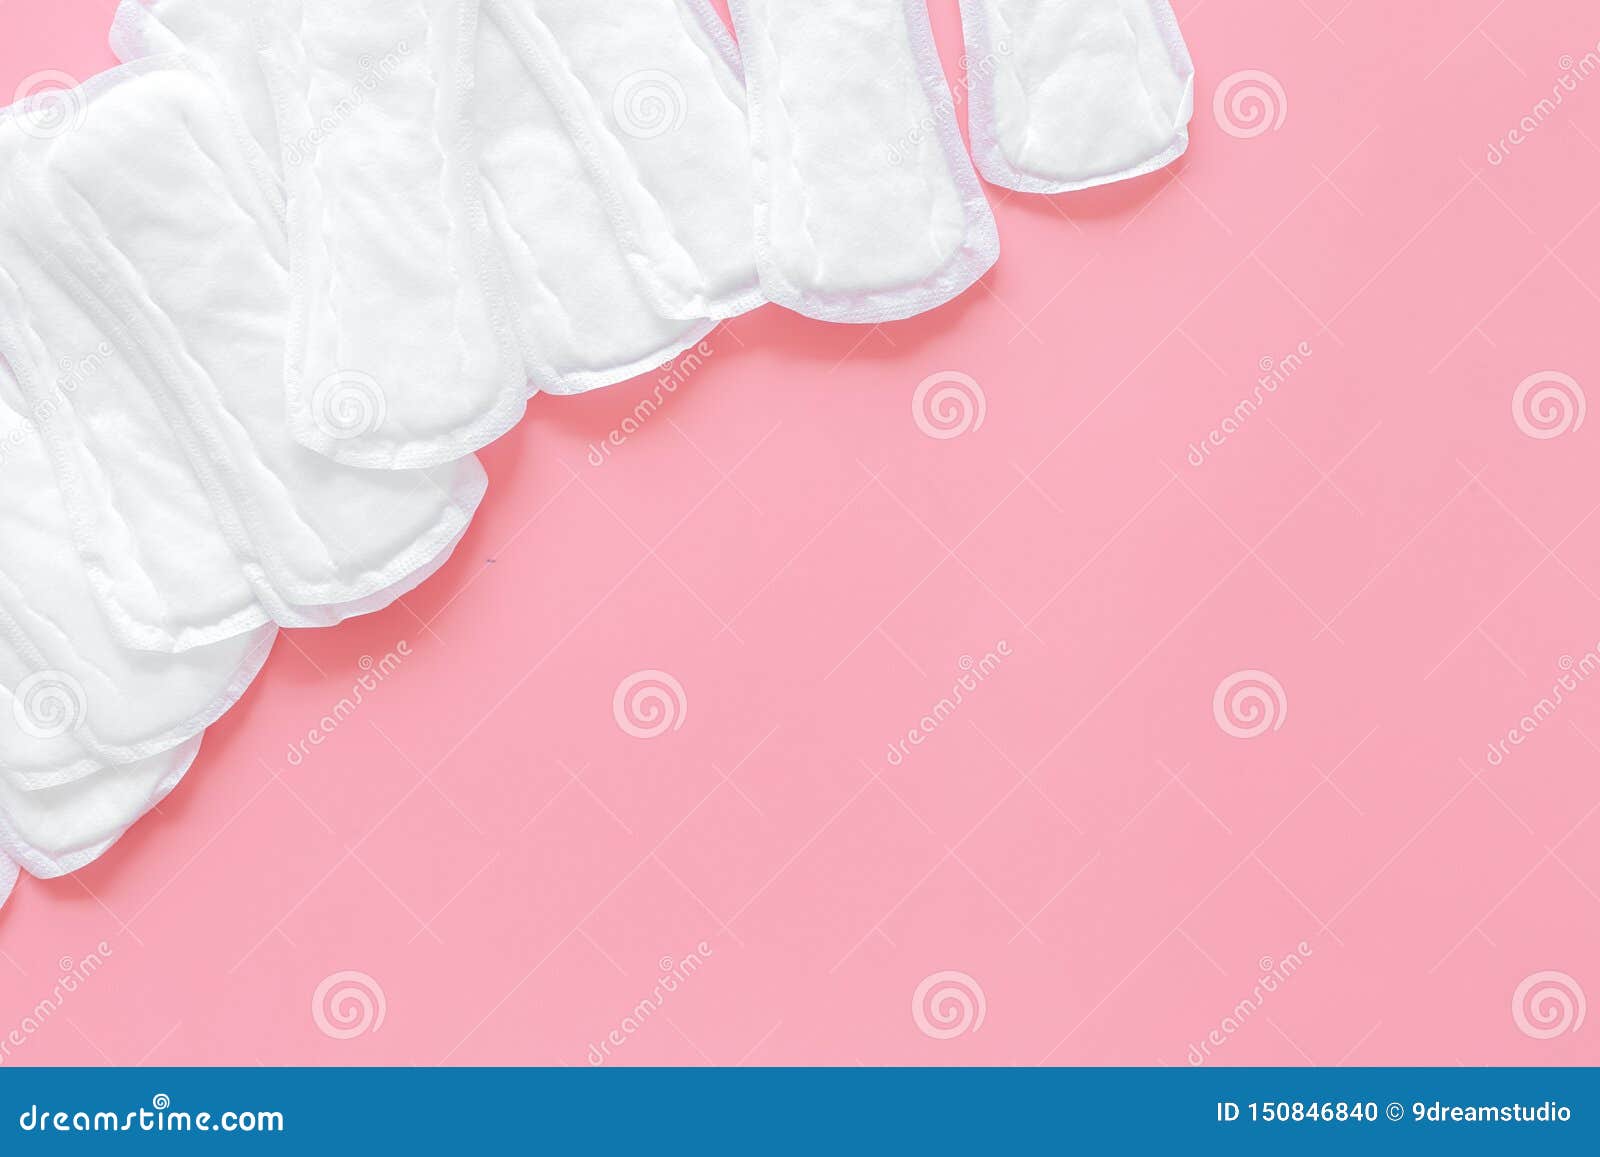 Menstrual Period Concept With Sanitary Pads On Pink ...